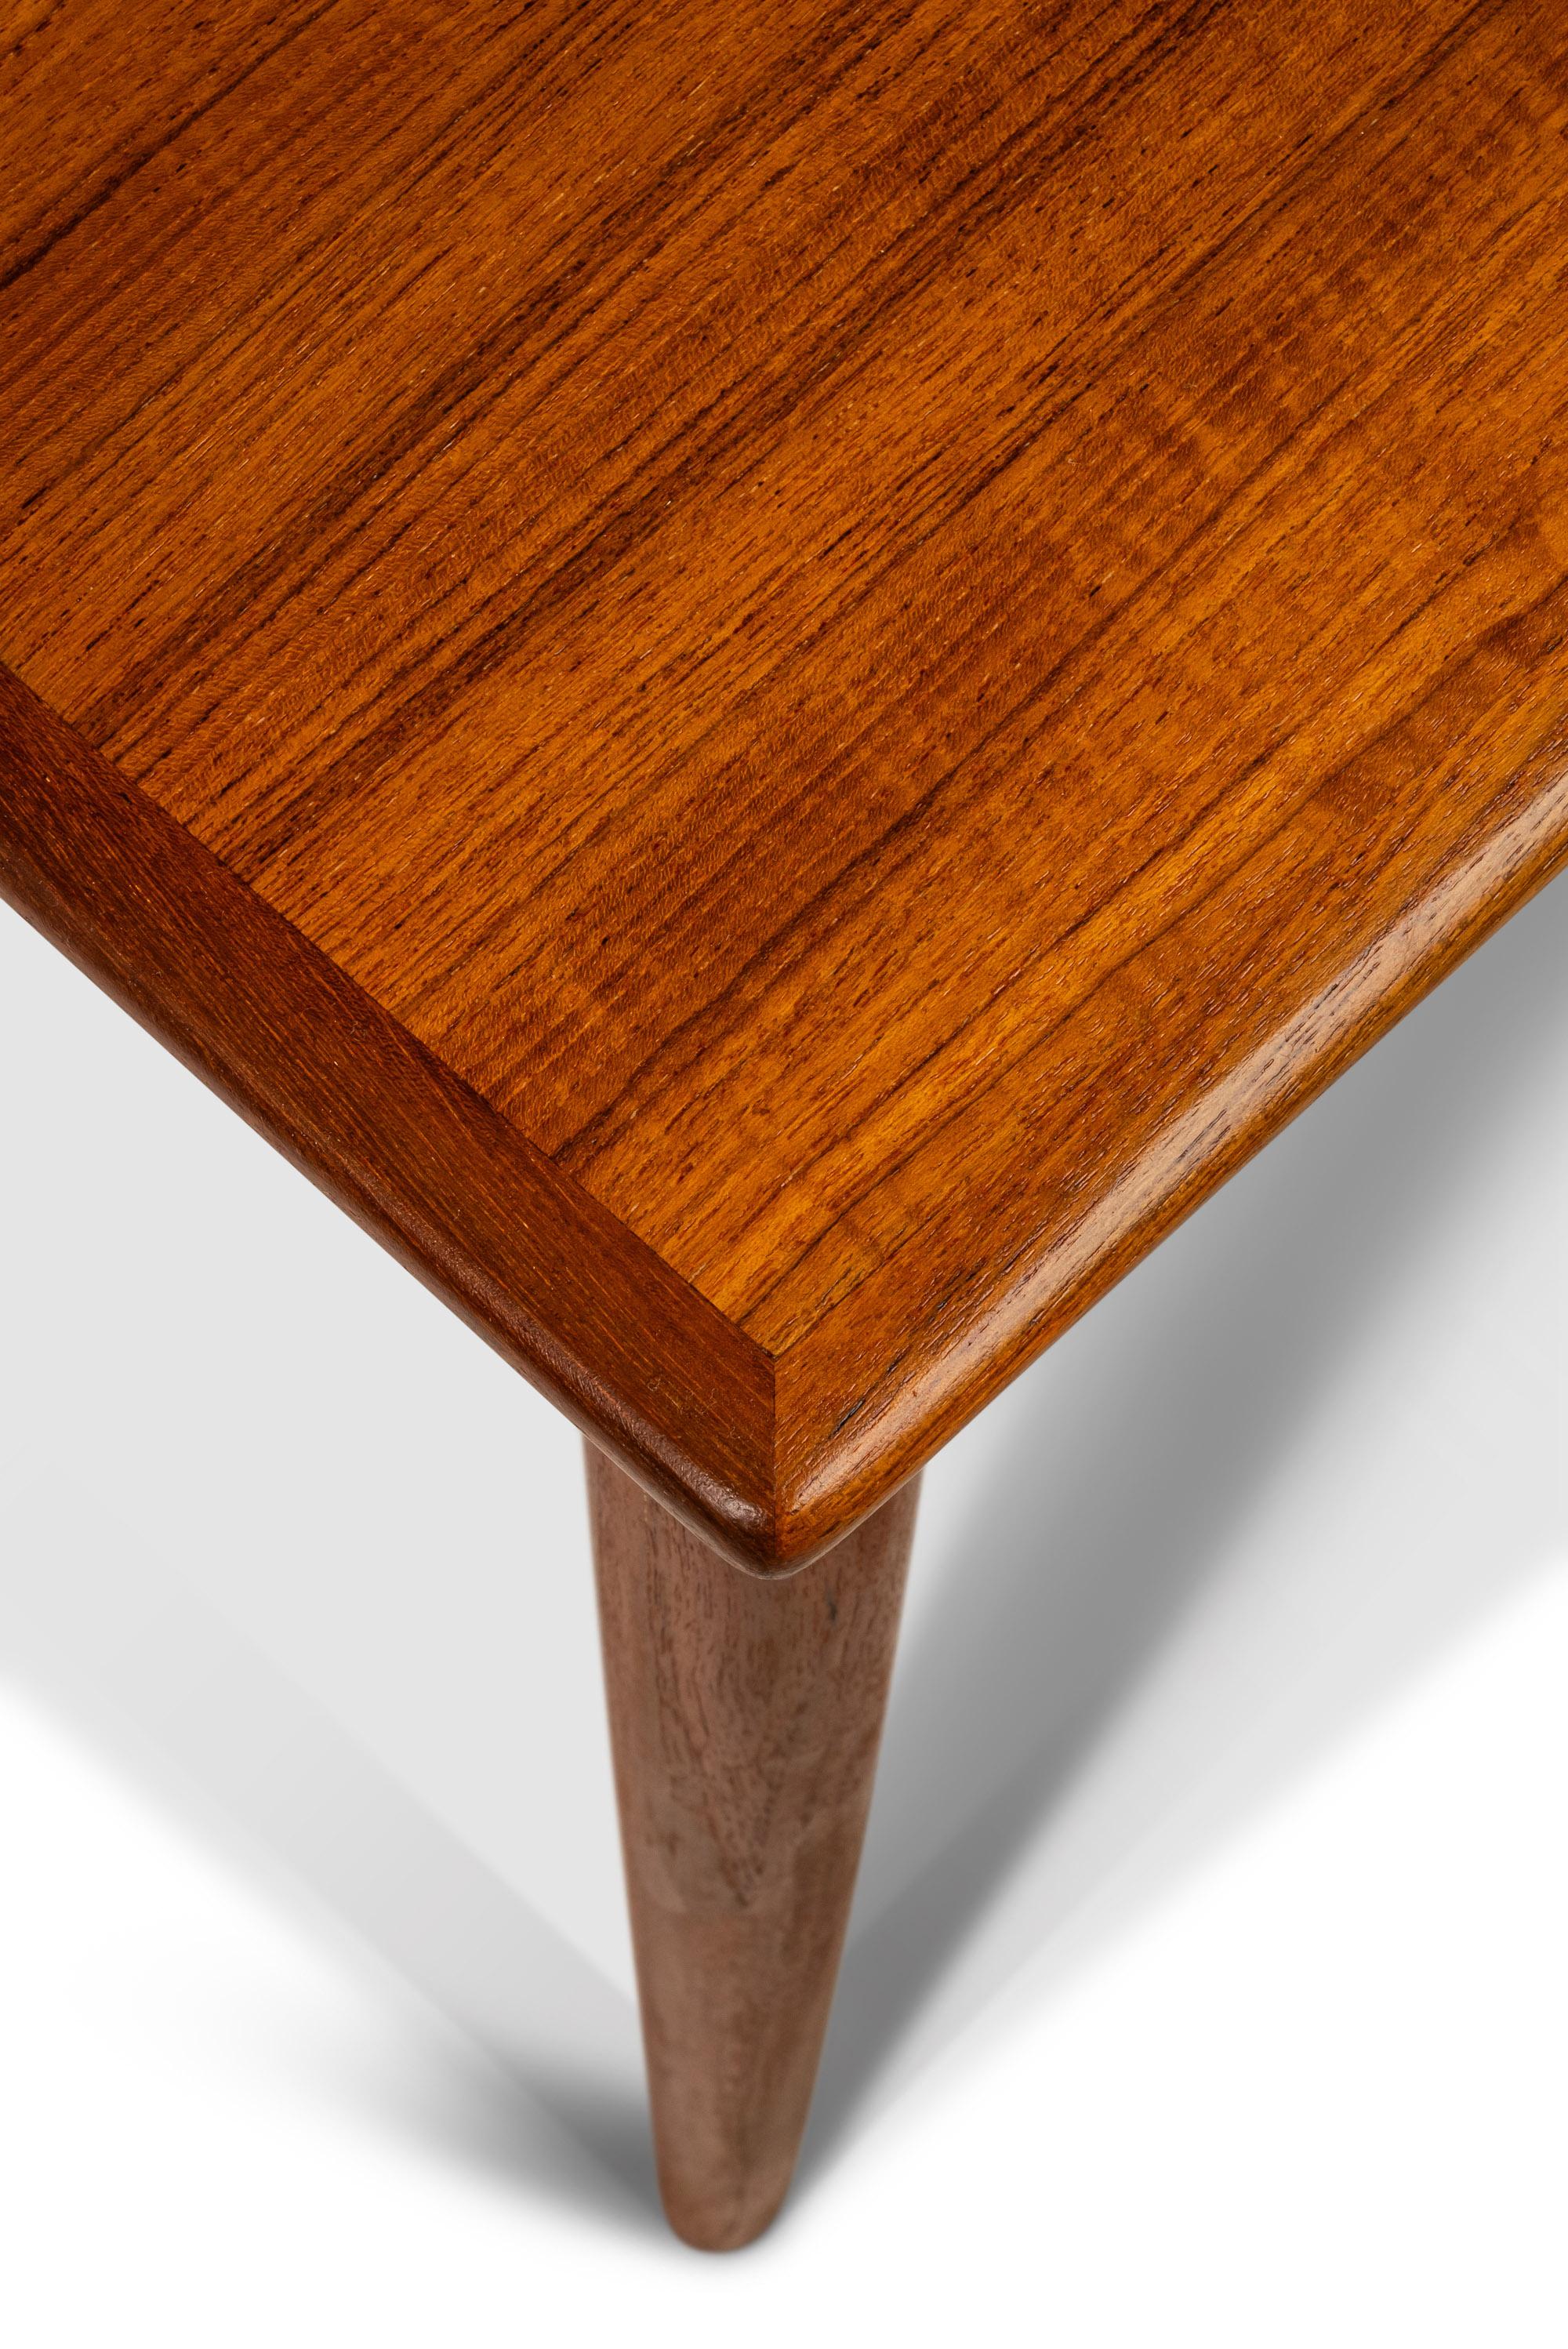 Danish Modern Expansion Dining Table in Teak w/ Stow-in-Table Leaves, c. 1960s For Sale 10